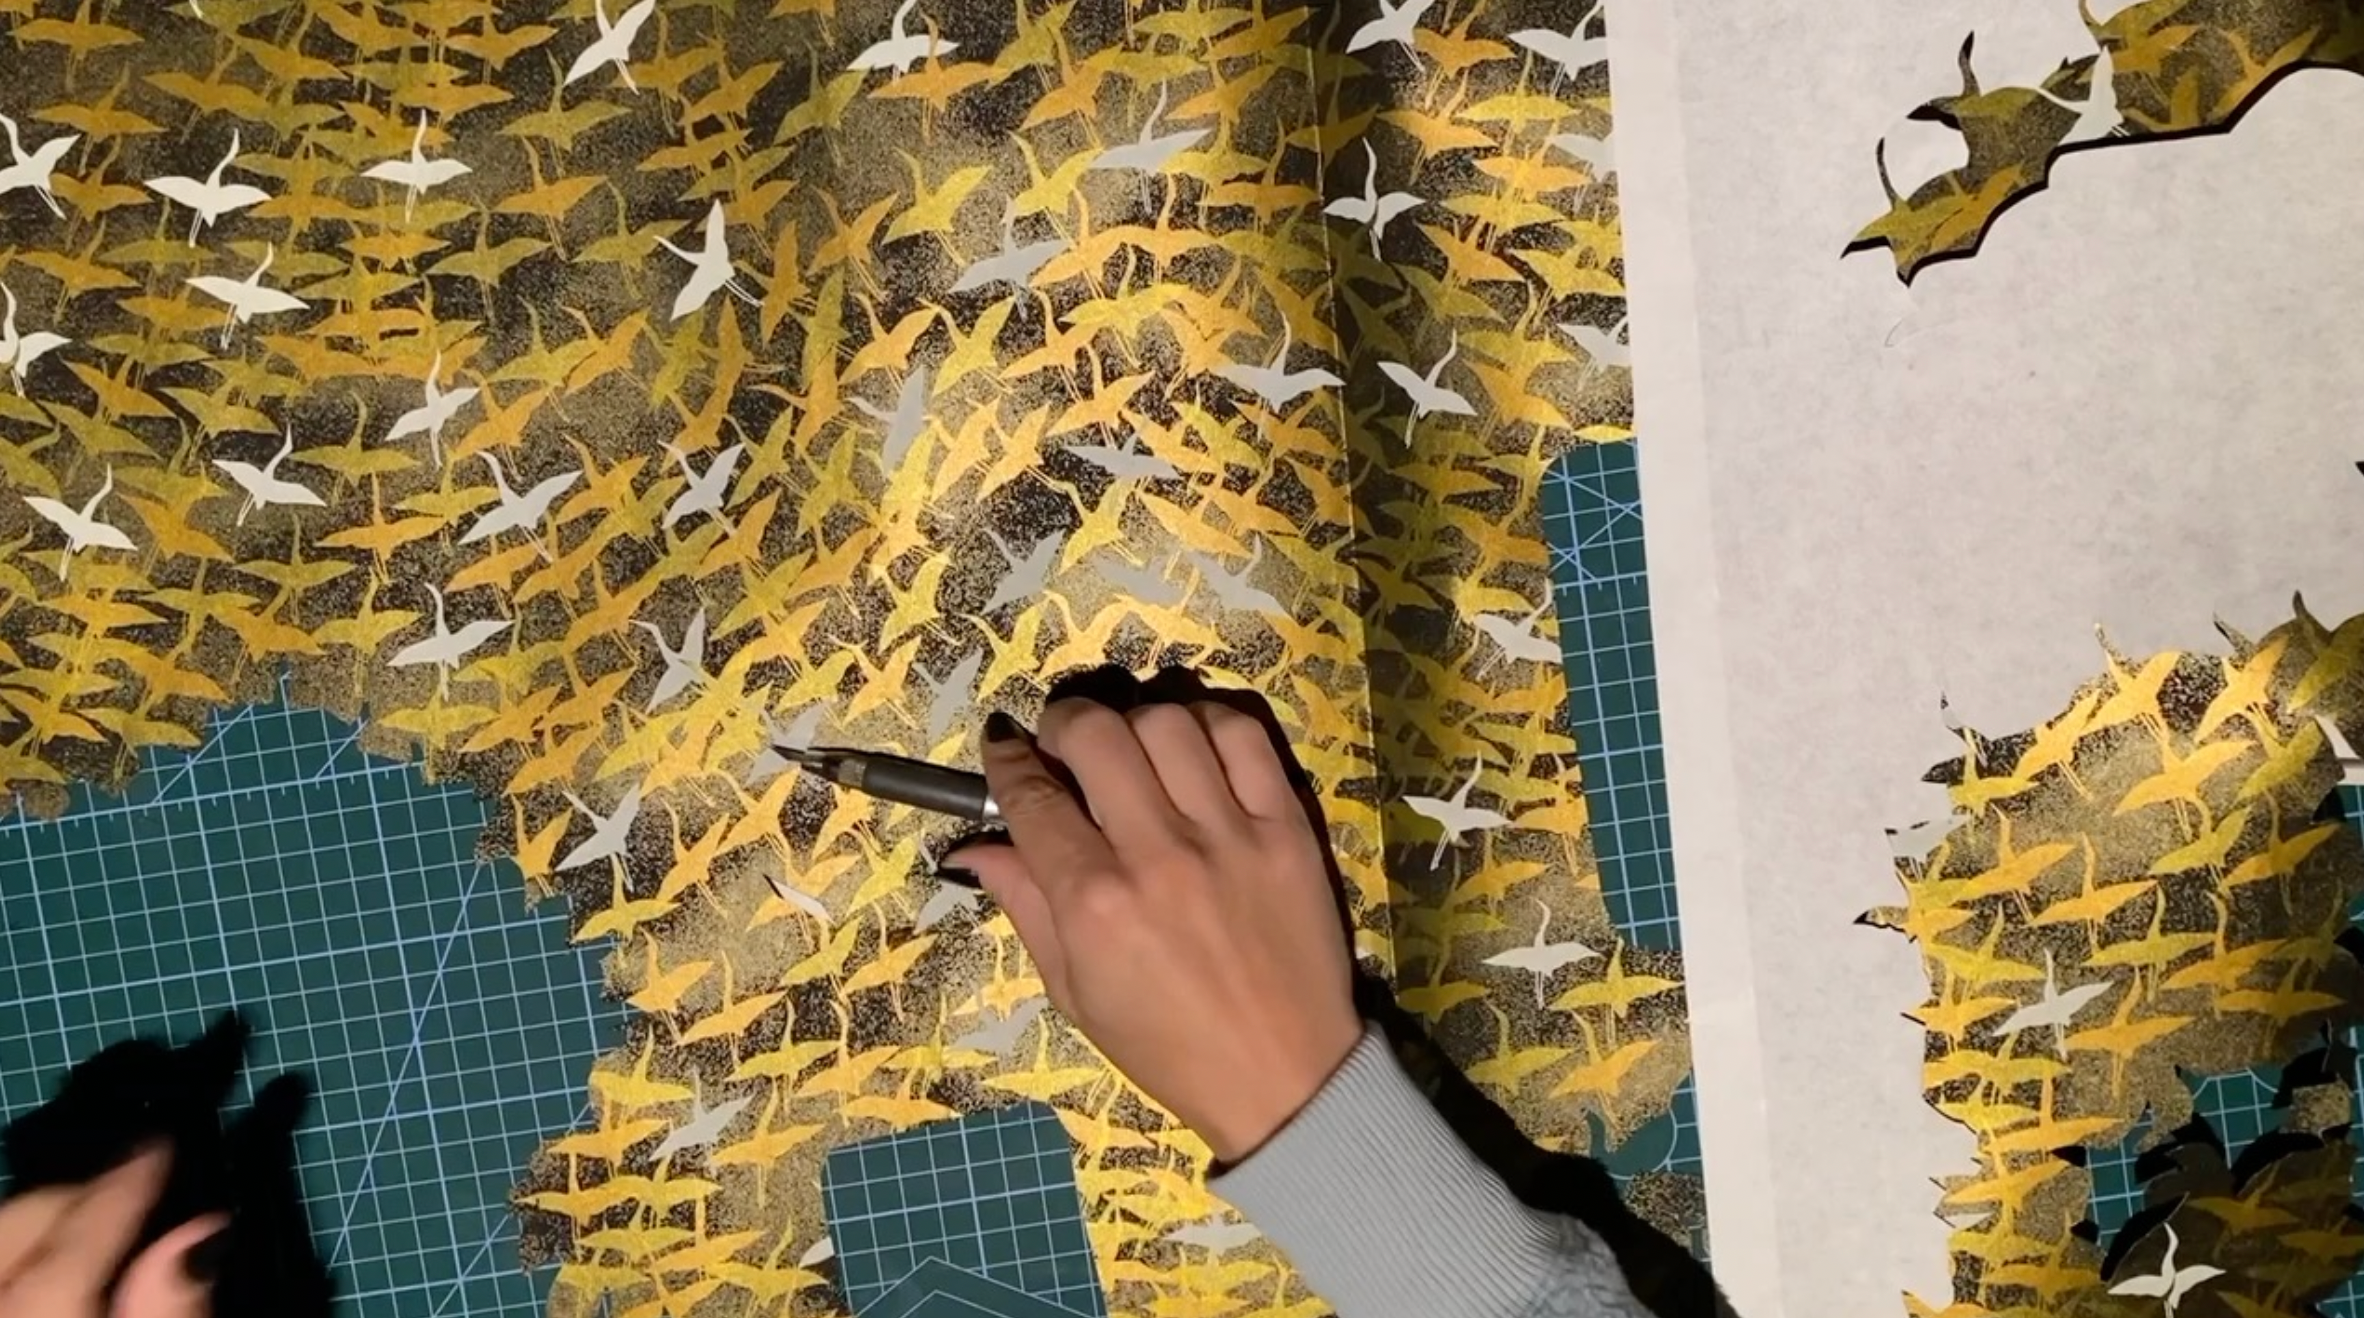 Load video: A close-up time-lapse of the artist cutting chiyogami paper with a paper knife.